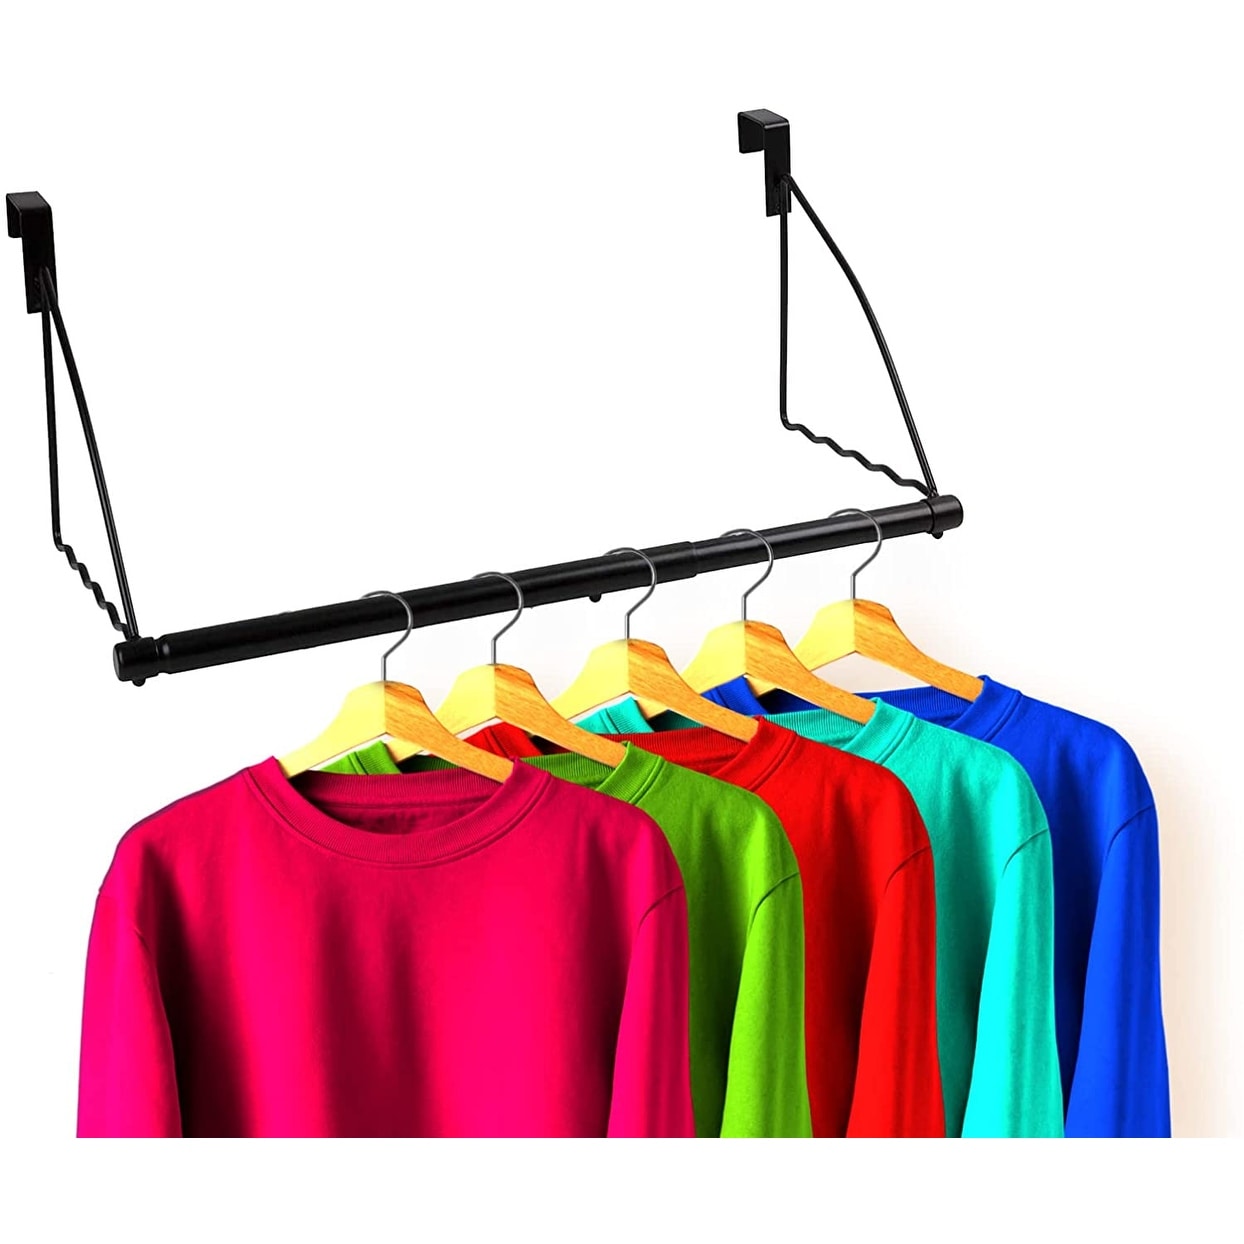 https://ak1.ostkcdn.com/images/products/is/images/direct/c3c4109aaf1ee0d481d8ff2a354f144c0ac9a986/Over-the-Door-Closet-Valet-with-Hanging-Bar-Expandable-17%22---24%22-L-x-10-x-10%22-Black.jpg